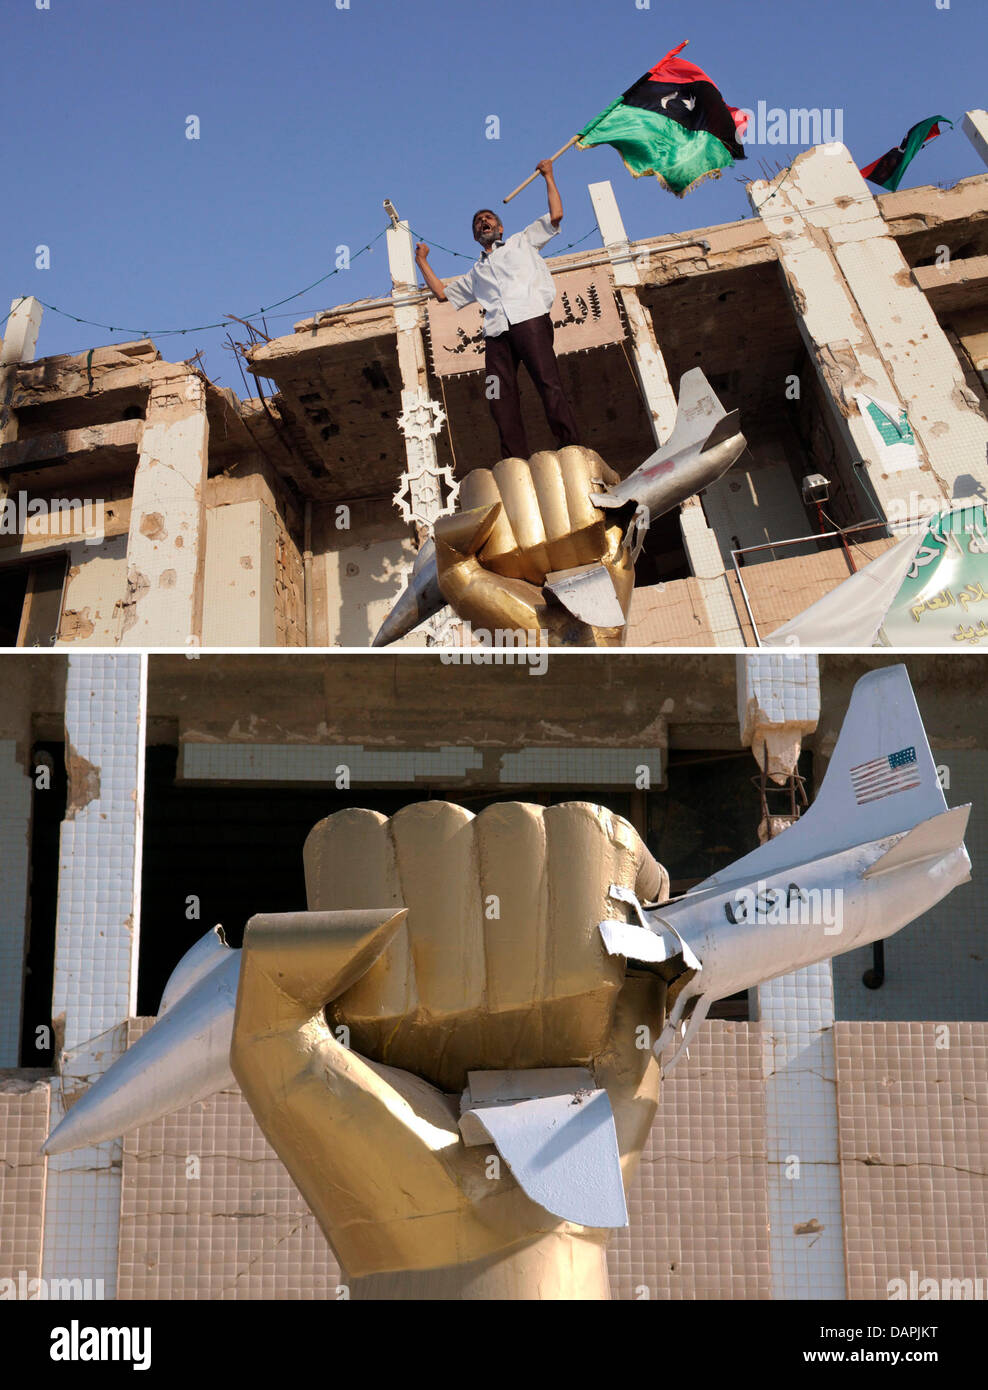 (dpa file) - A file picture dated 15 October 2011 of a golden fist crushing an US military jet in front of a house owned by Libyan leader Muammar Gaddafi and destroyed by an US attack after the LaBelle bombing in 1986 standing on the premises of Gaddafi's compound in Tripoli, Libya. Even after the revolutionary storm onto his headquarters Muammar Gaddafi remains pugnacious. On 24 A Stock Photo